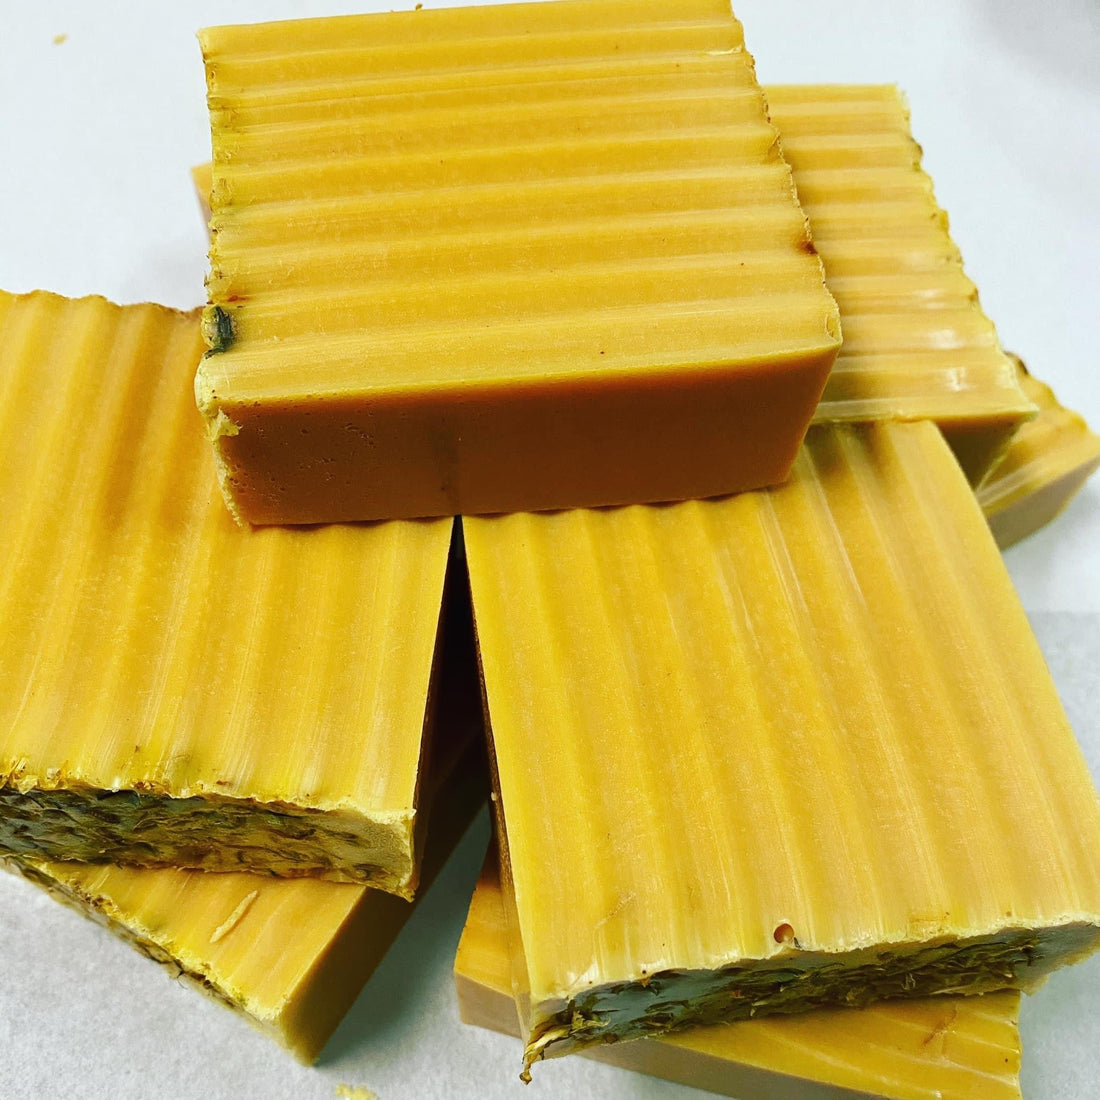 Handmade Soaps Can Restore the Beauty of Your Skin